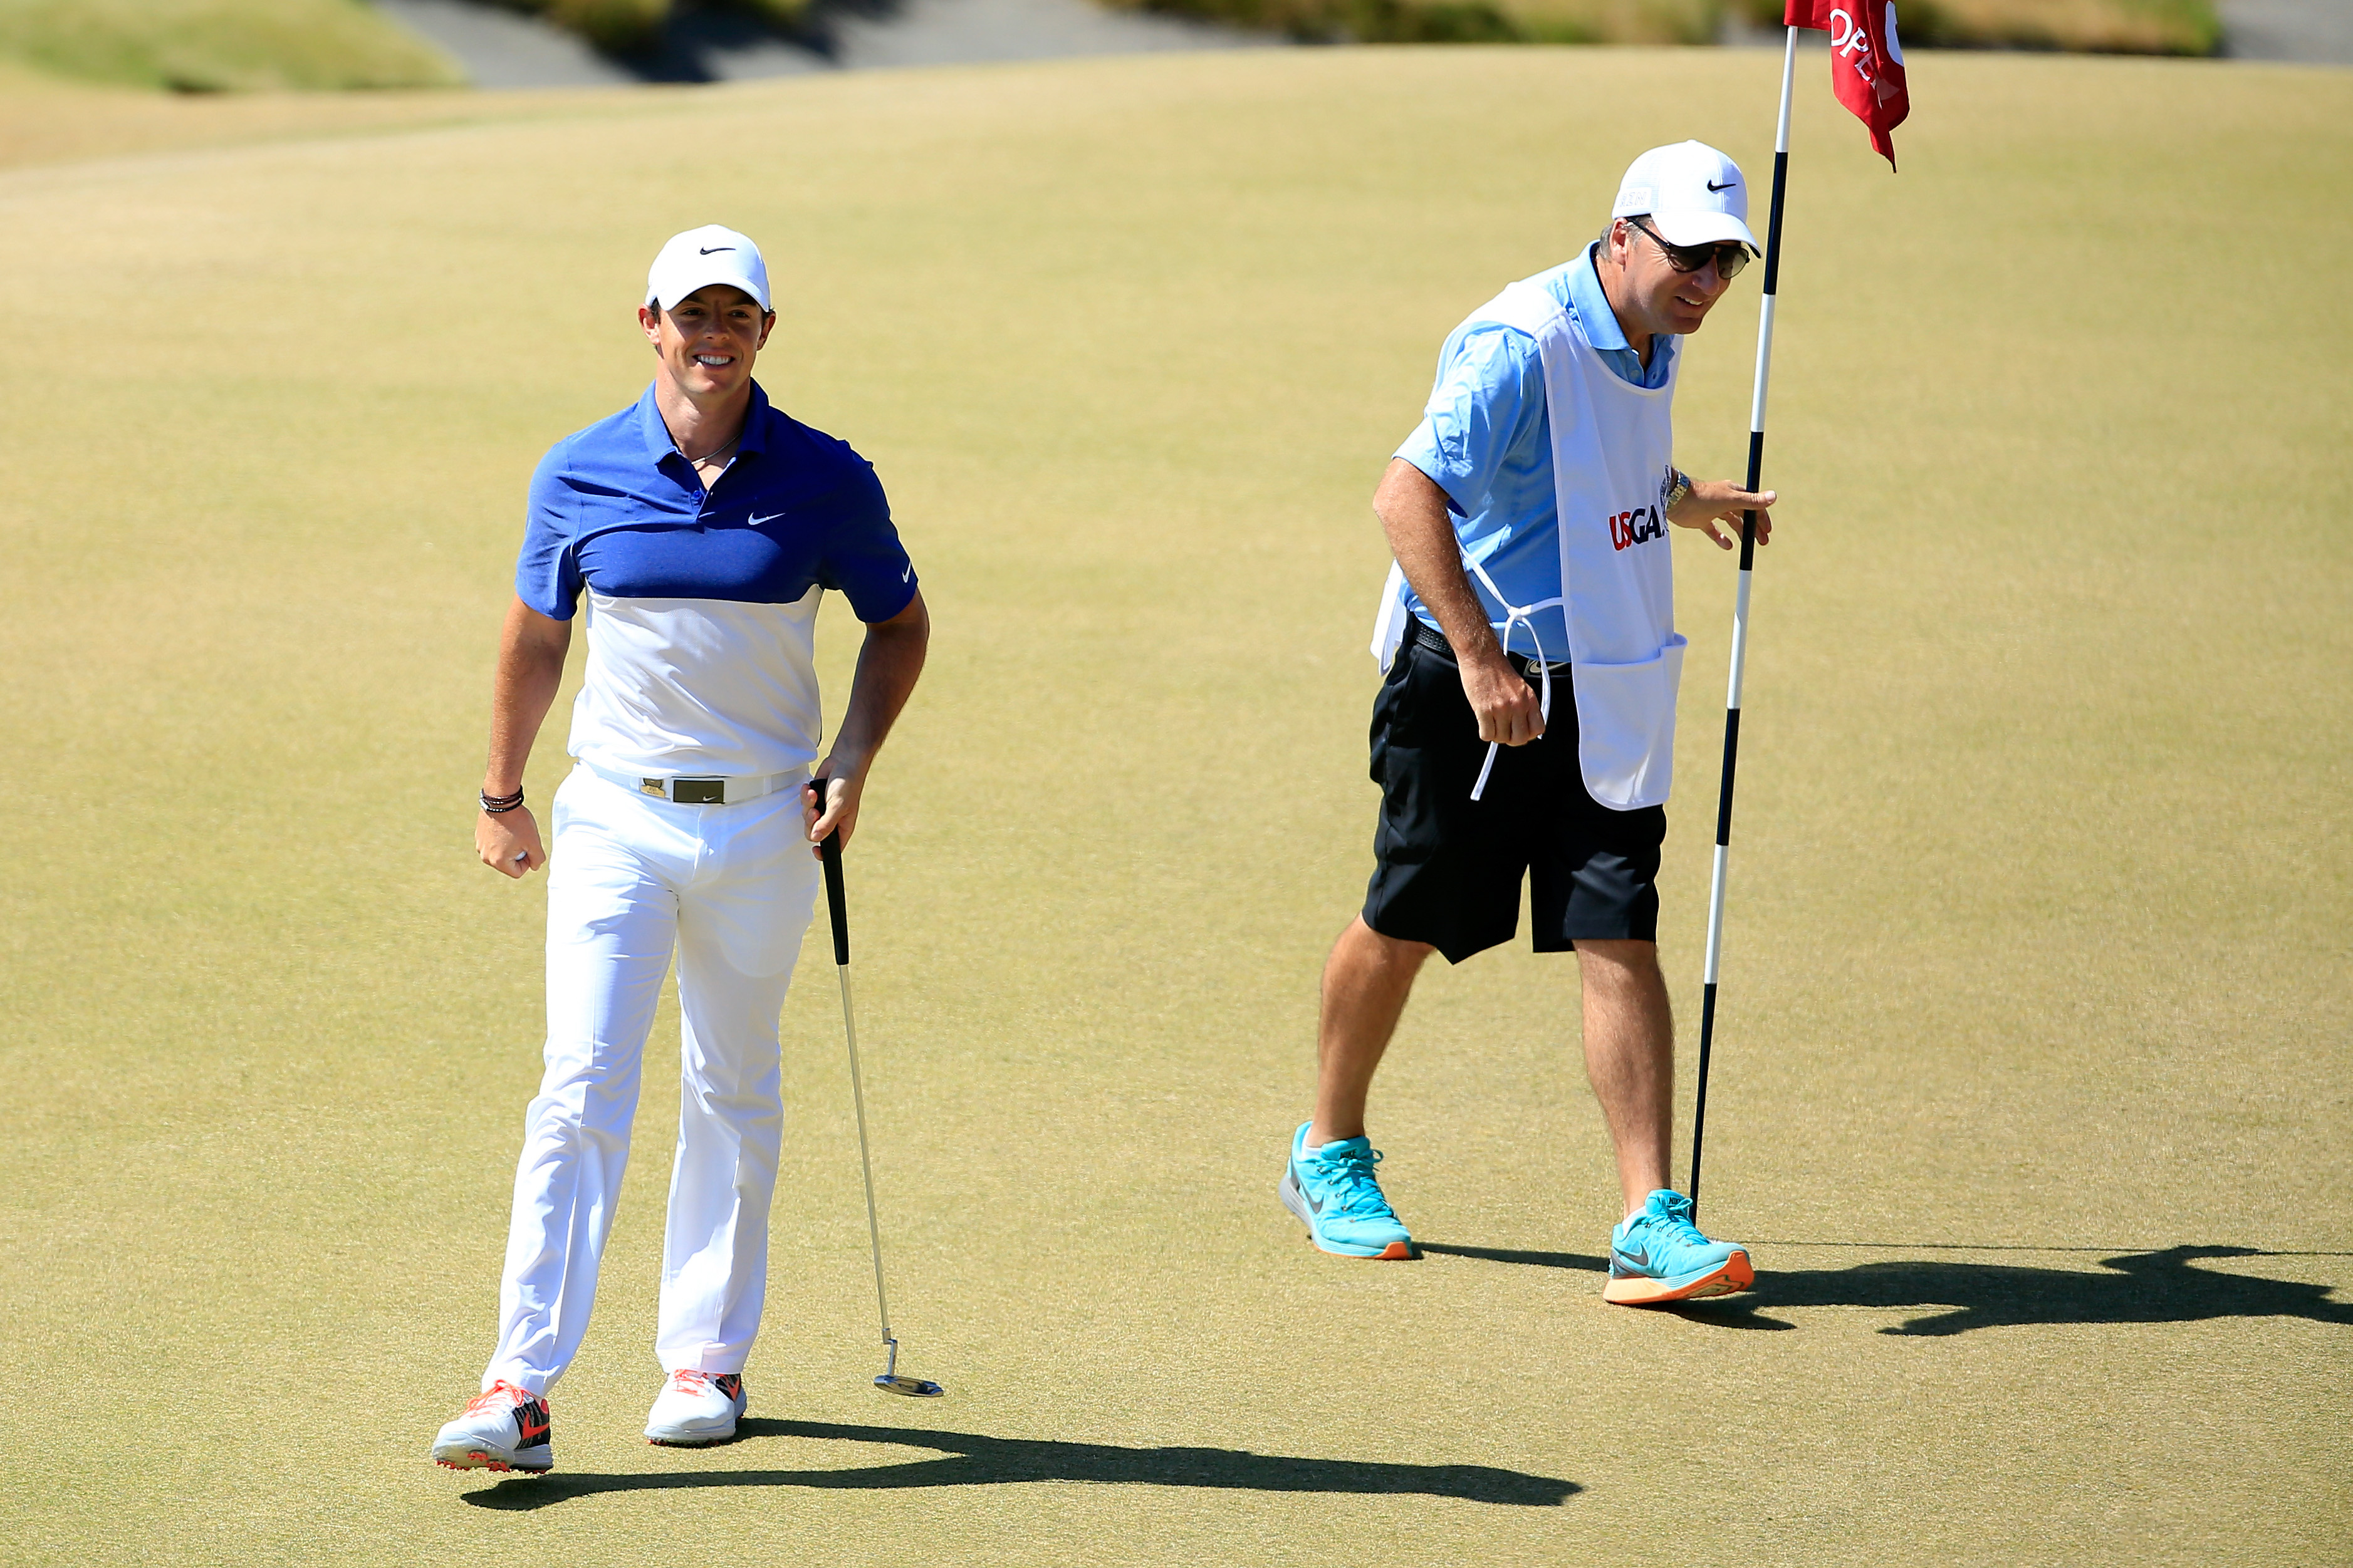 McIlroy will not play in the Open after tearing ankle ligaments playing football (Photo: Getty Images)